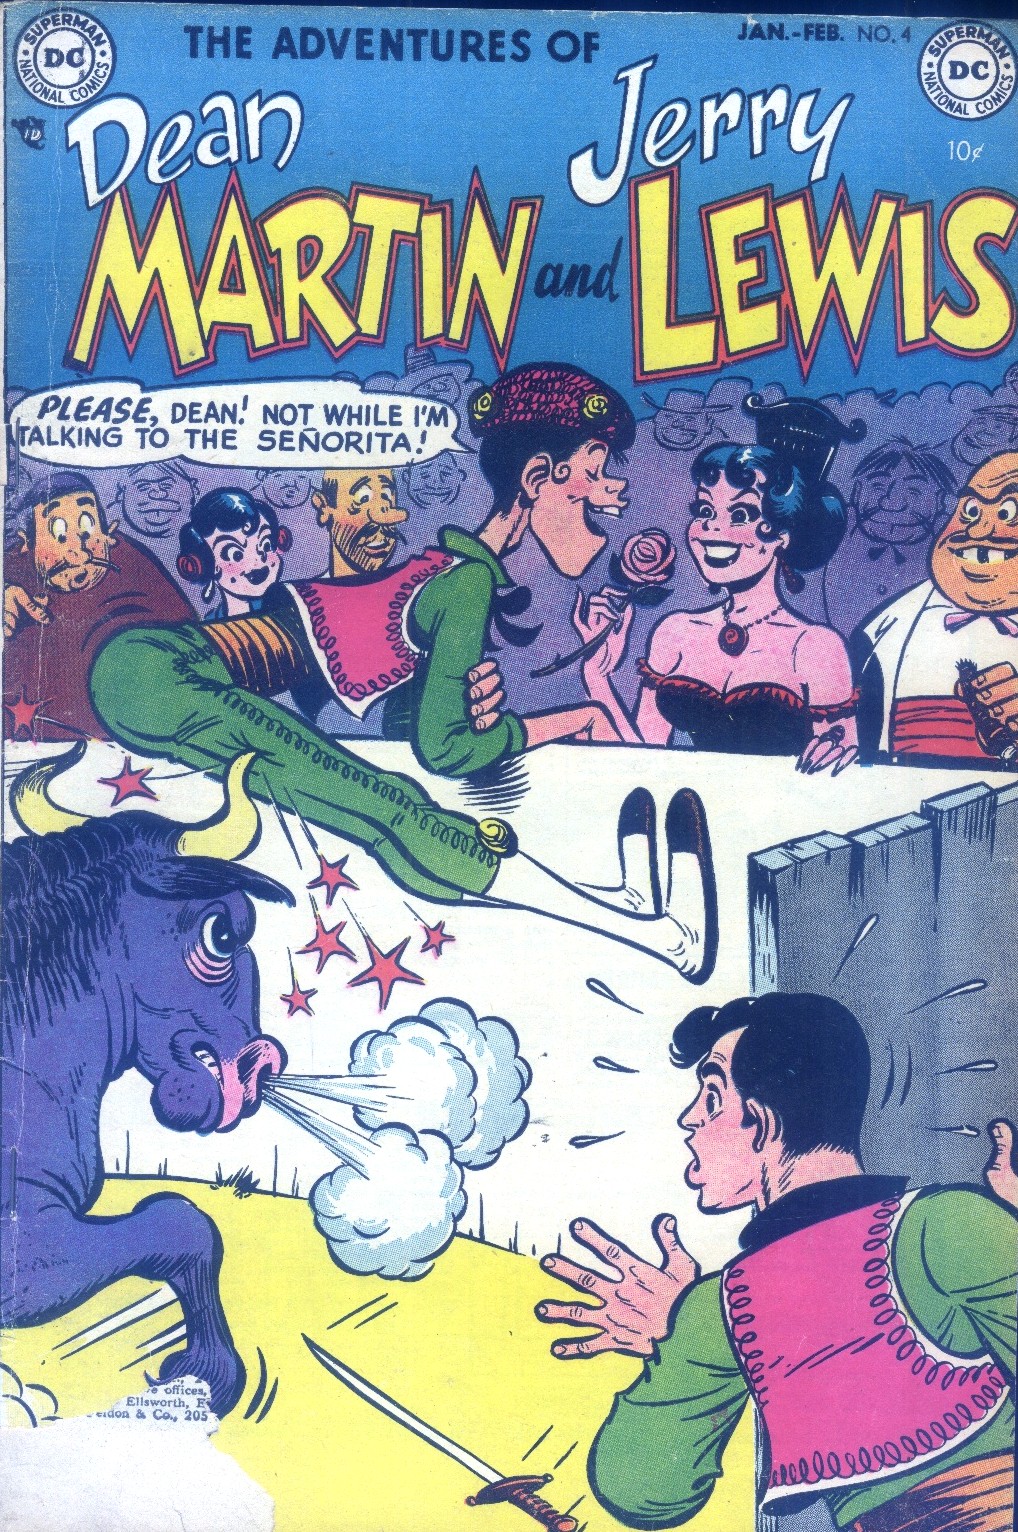 Read online The Adventures of Dean Martin and Jerry Lewis comic -  Issue #4 - 1